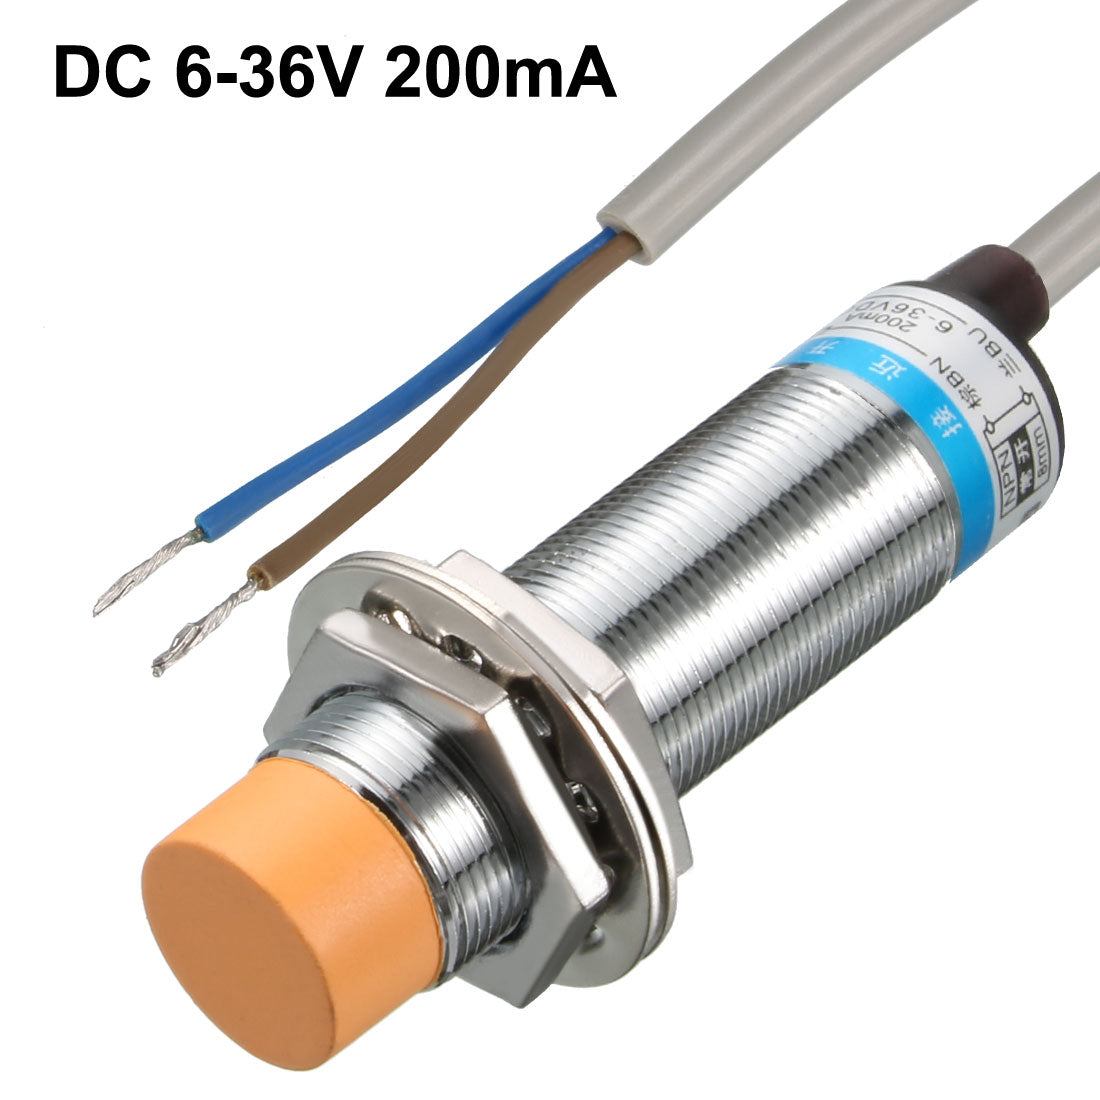 uxcell Uxcell 8mm Inductive Proximity Sensor Switch Detector NO DC 6-36V 200mA 2-wire LJ18A3-8-Z/EX